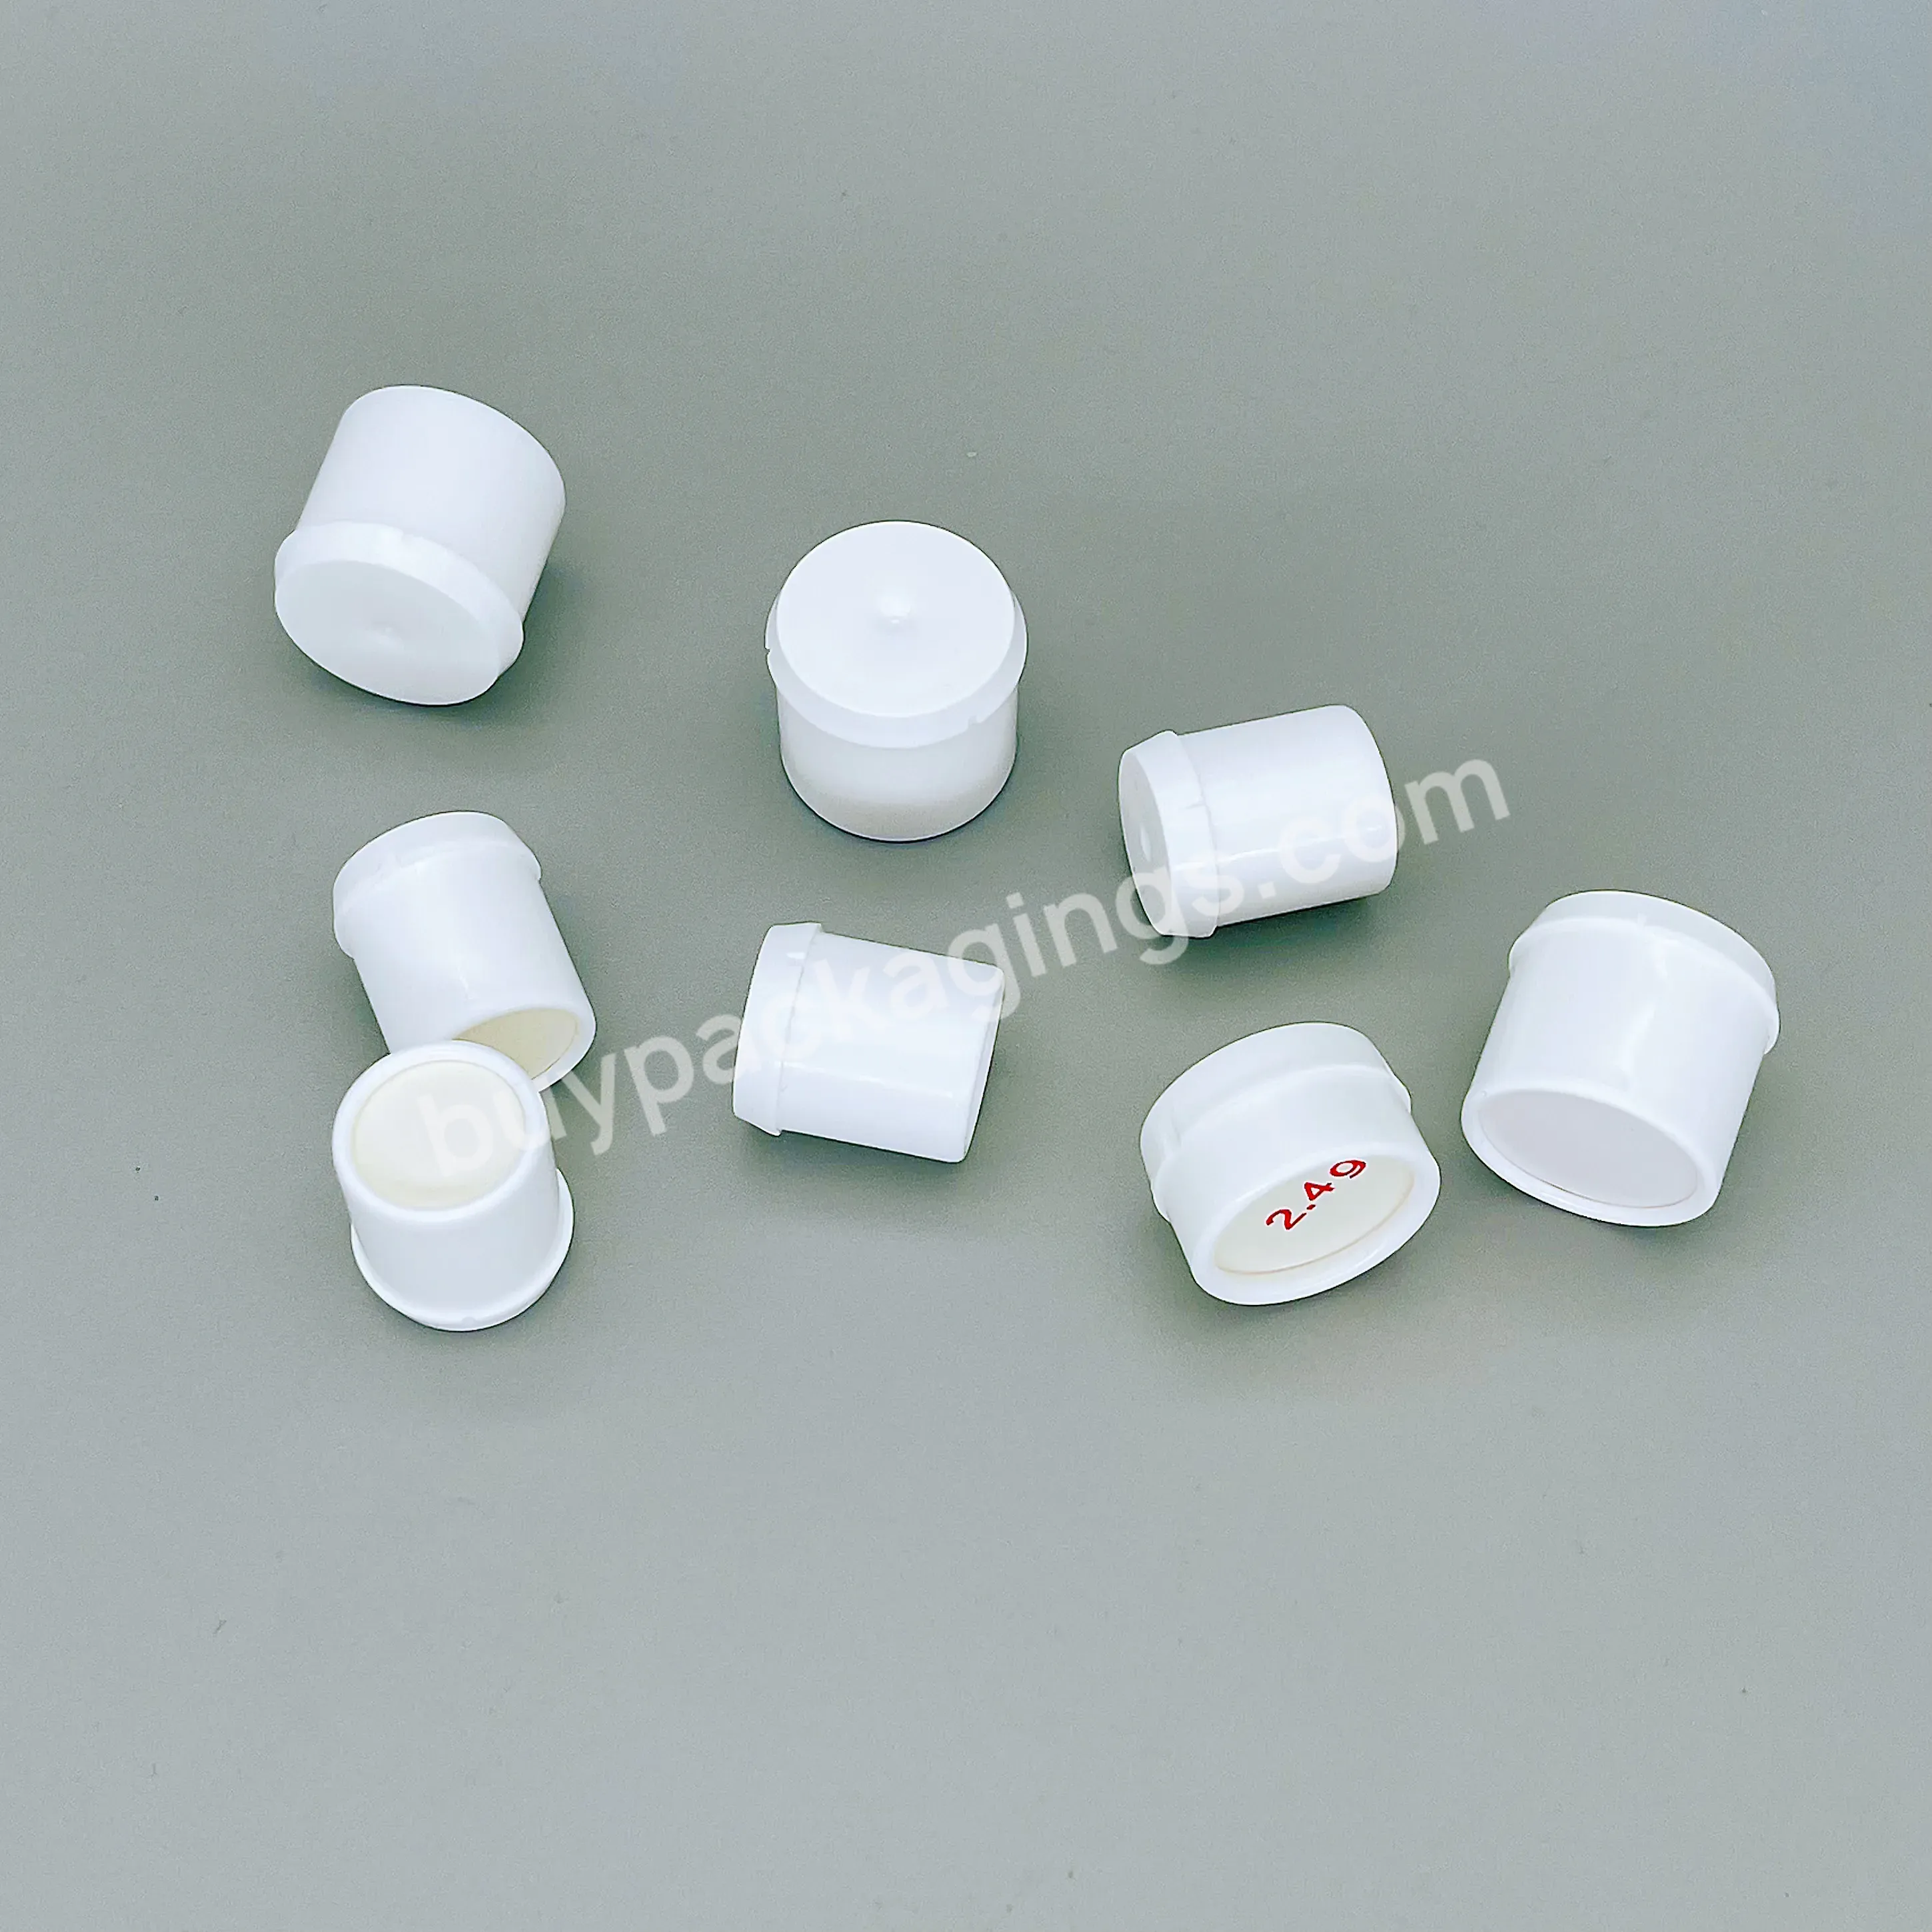 Health Food Sorbent Desiccant Cover Silica Gel Desiccant Lid For Complementary Pharmacy Capsule And Tablets Moisture Absorbing - Buy Silica Gel Desiccant Covers,Pharmacy Capsule Desiccant,Silica Gel Desiccant Canister.